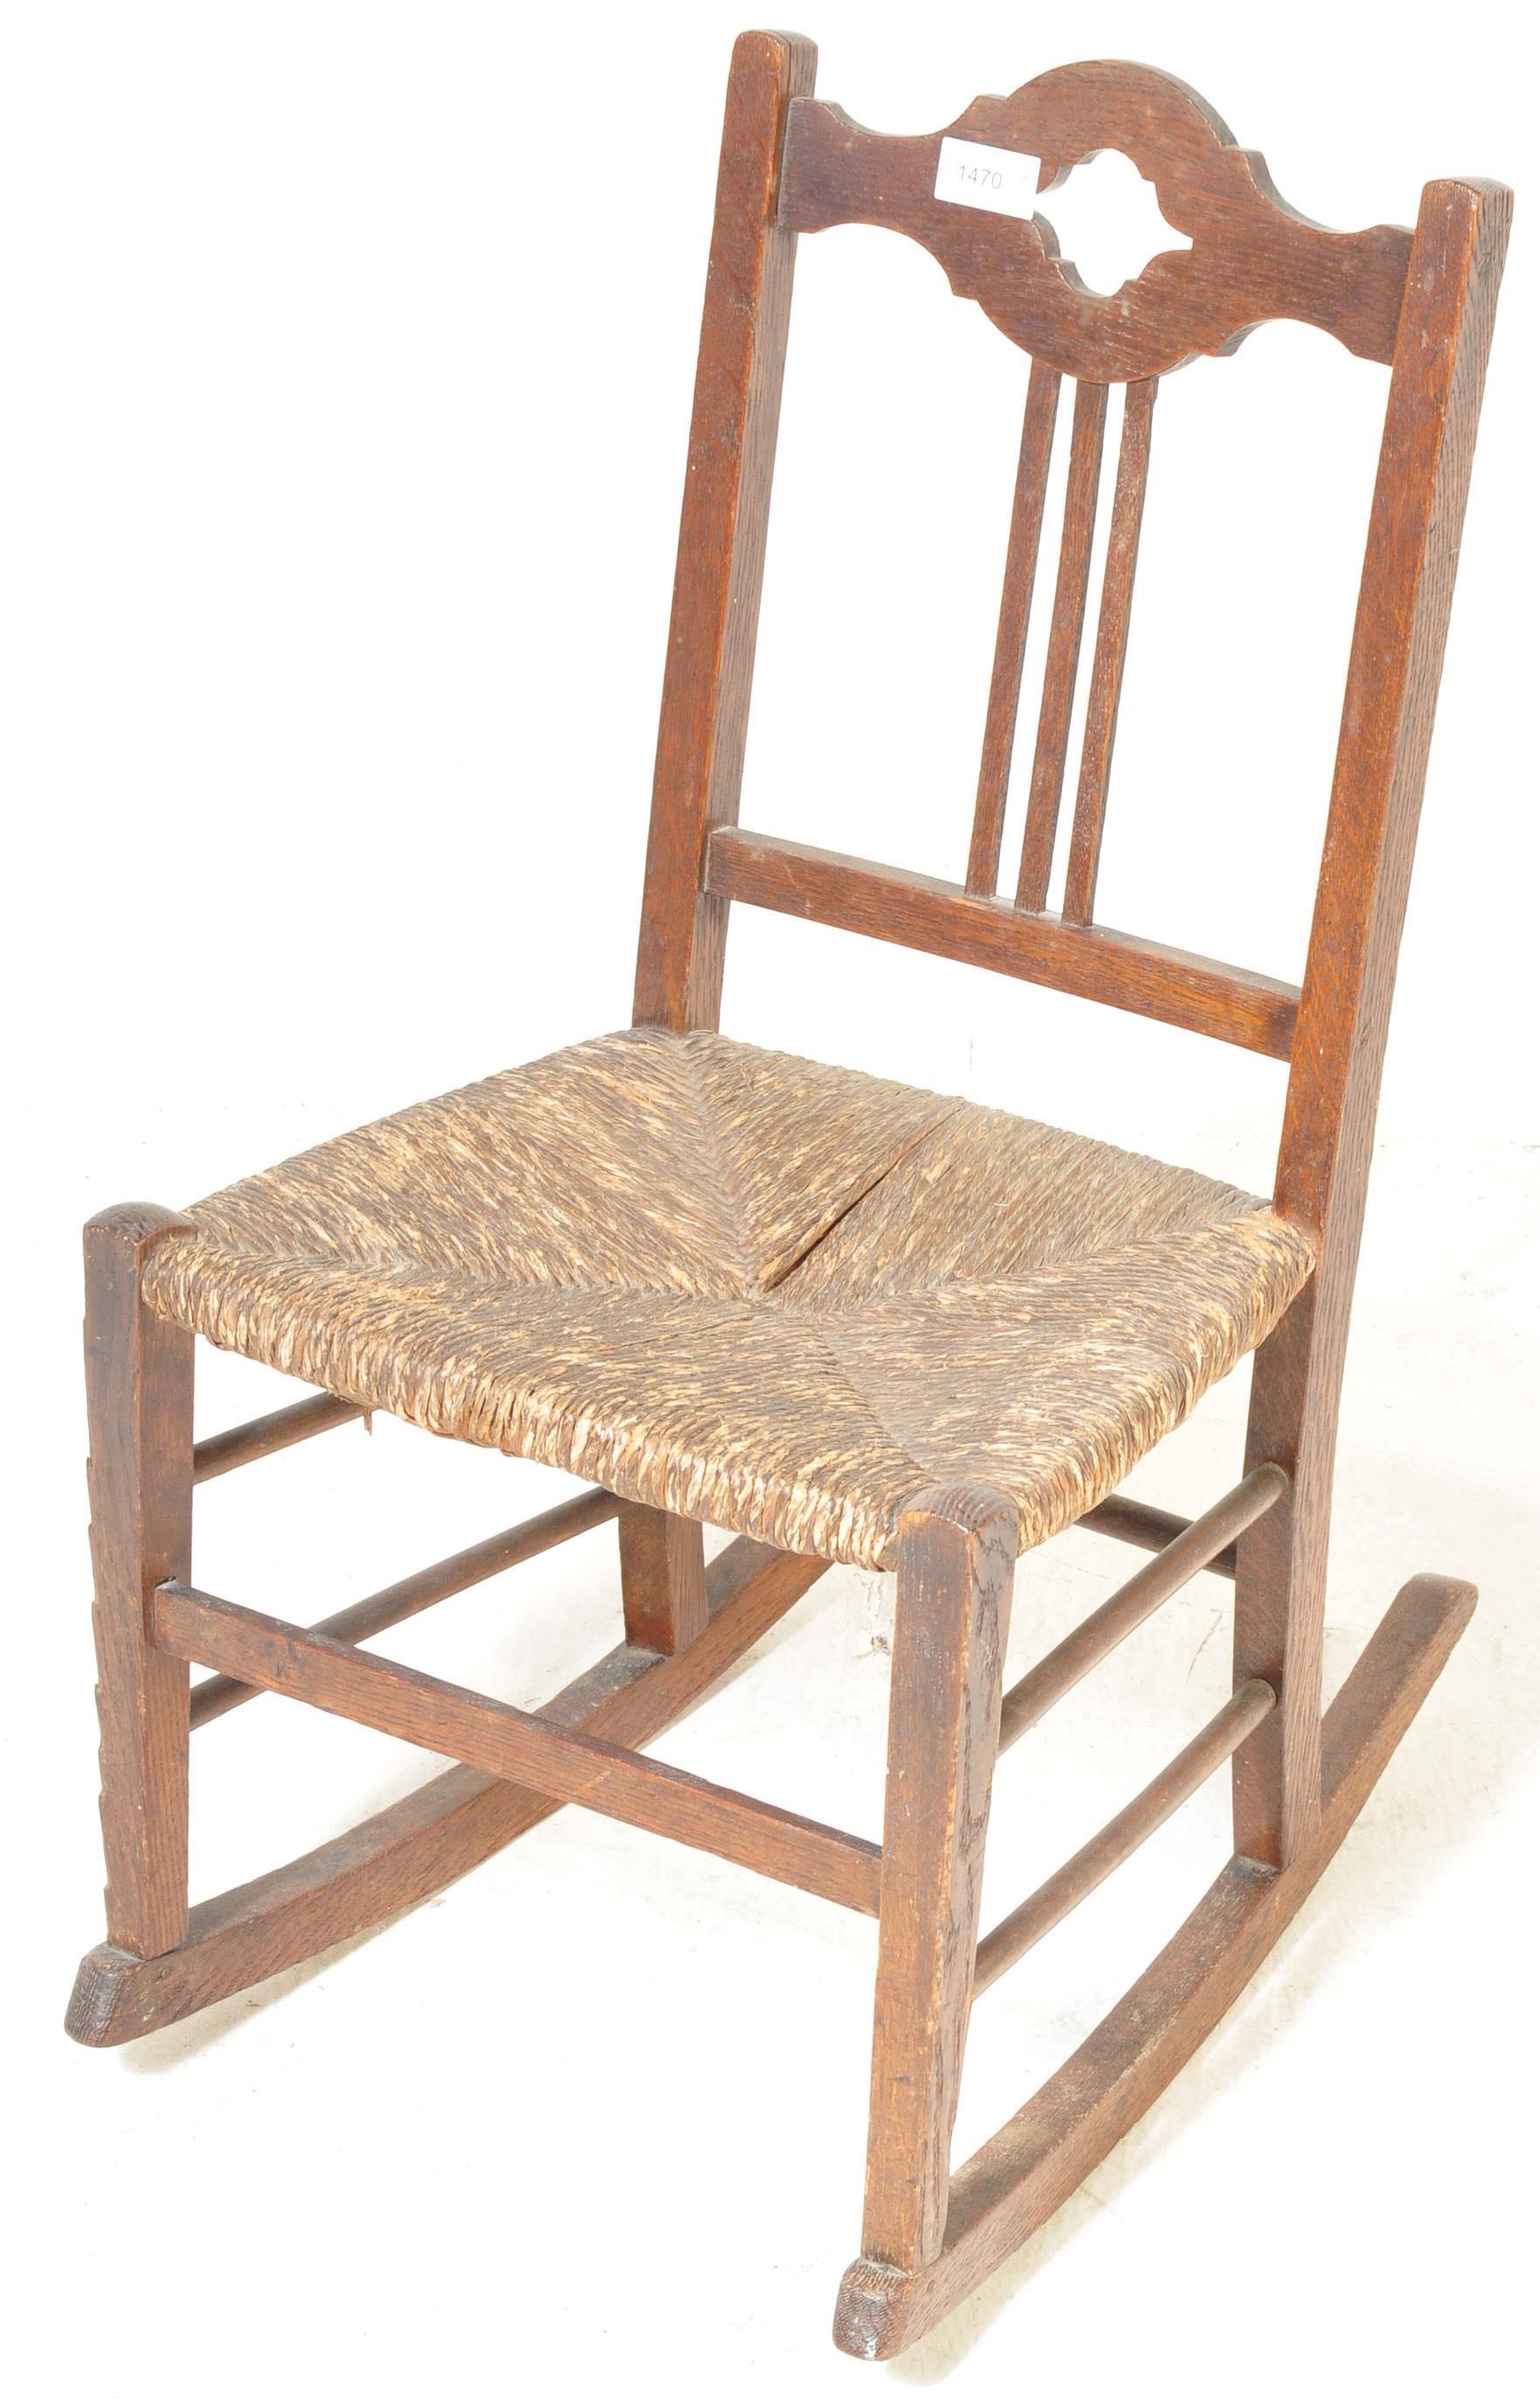 EARLY 20TH CENTURY ARTS & CRAFTS MINATURE ROCKING CHAIR - Image 2 of 6